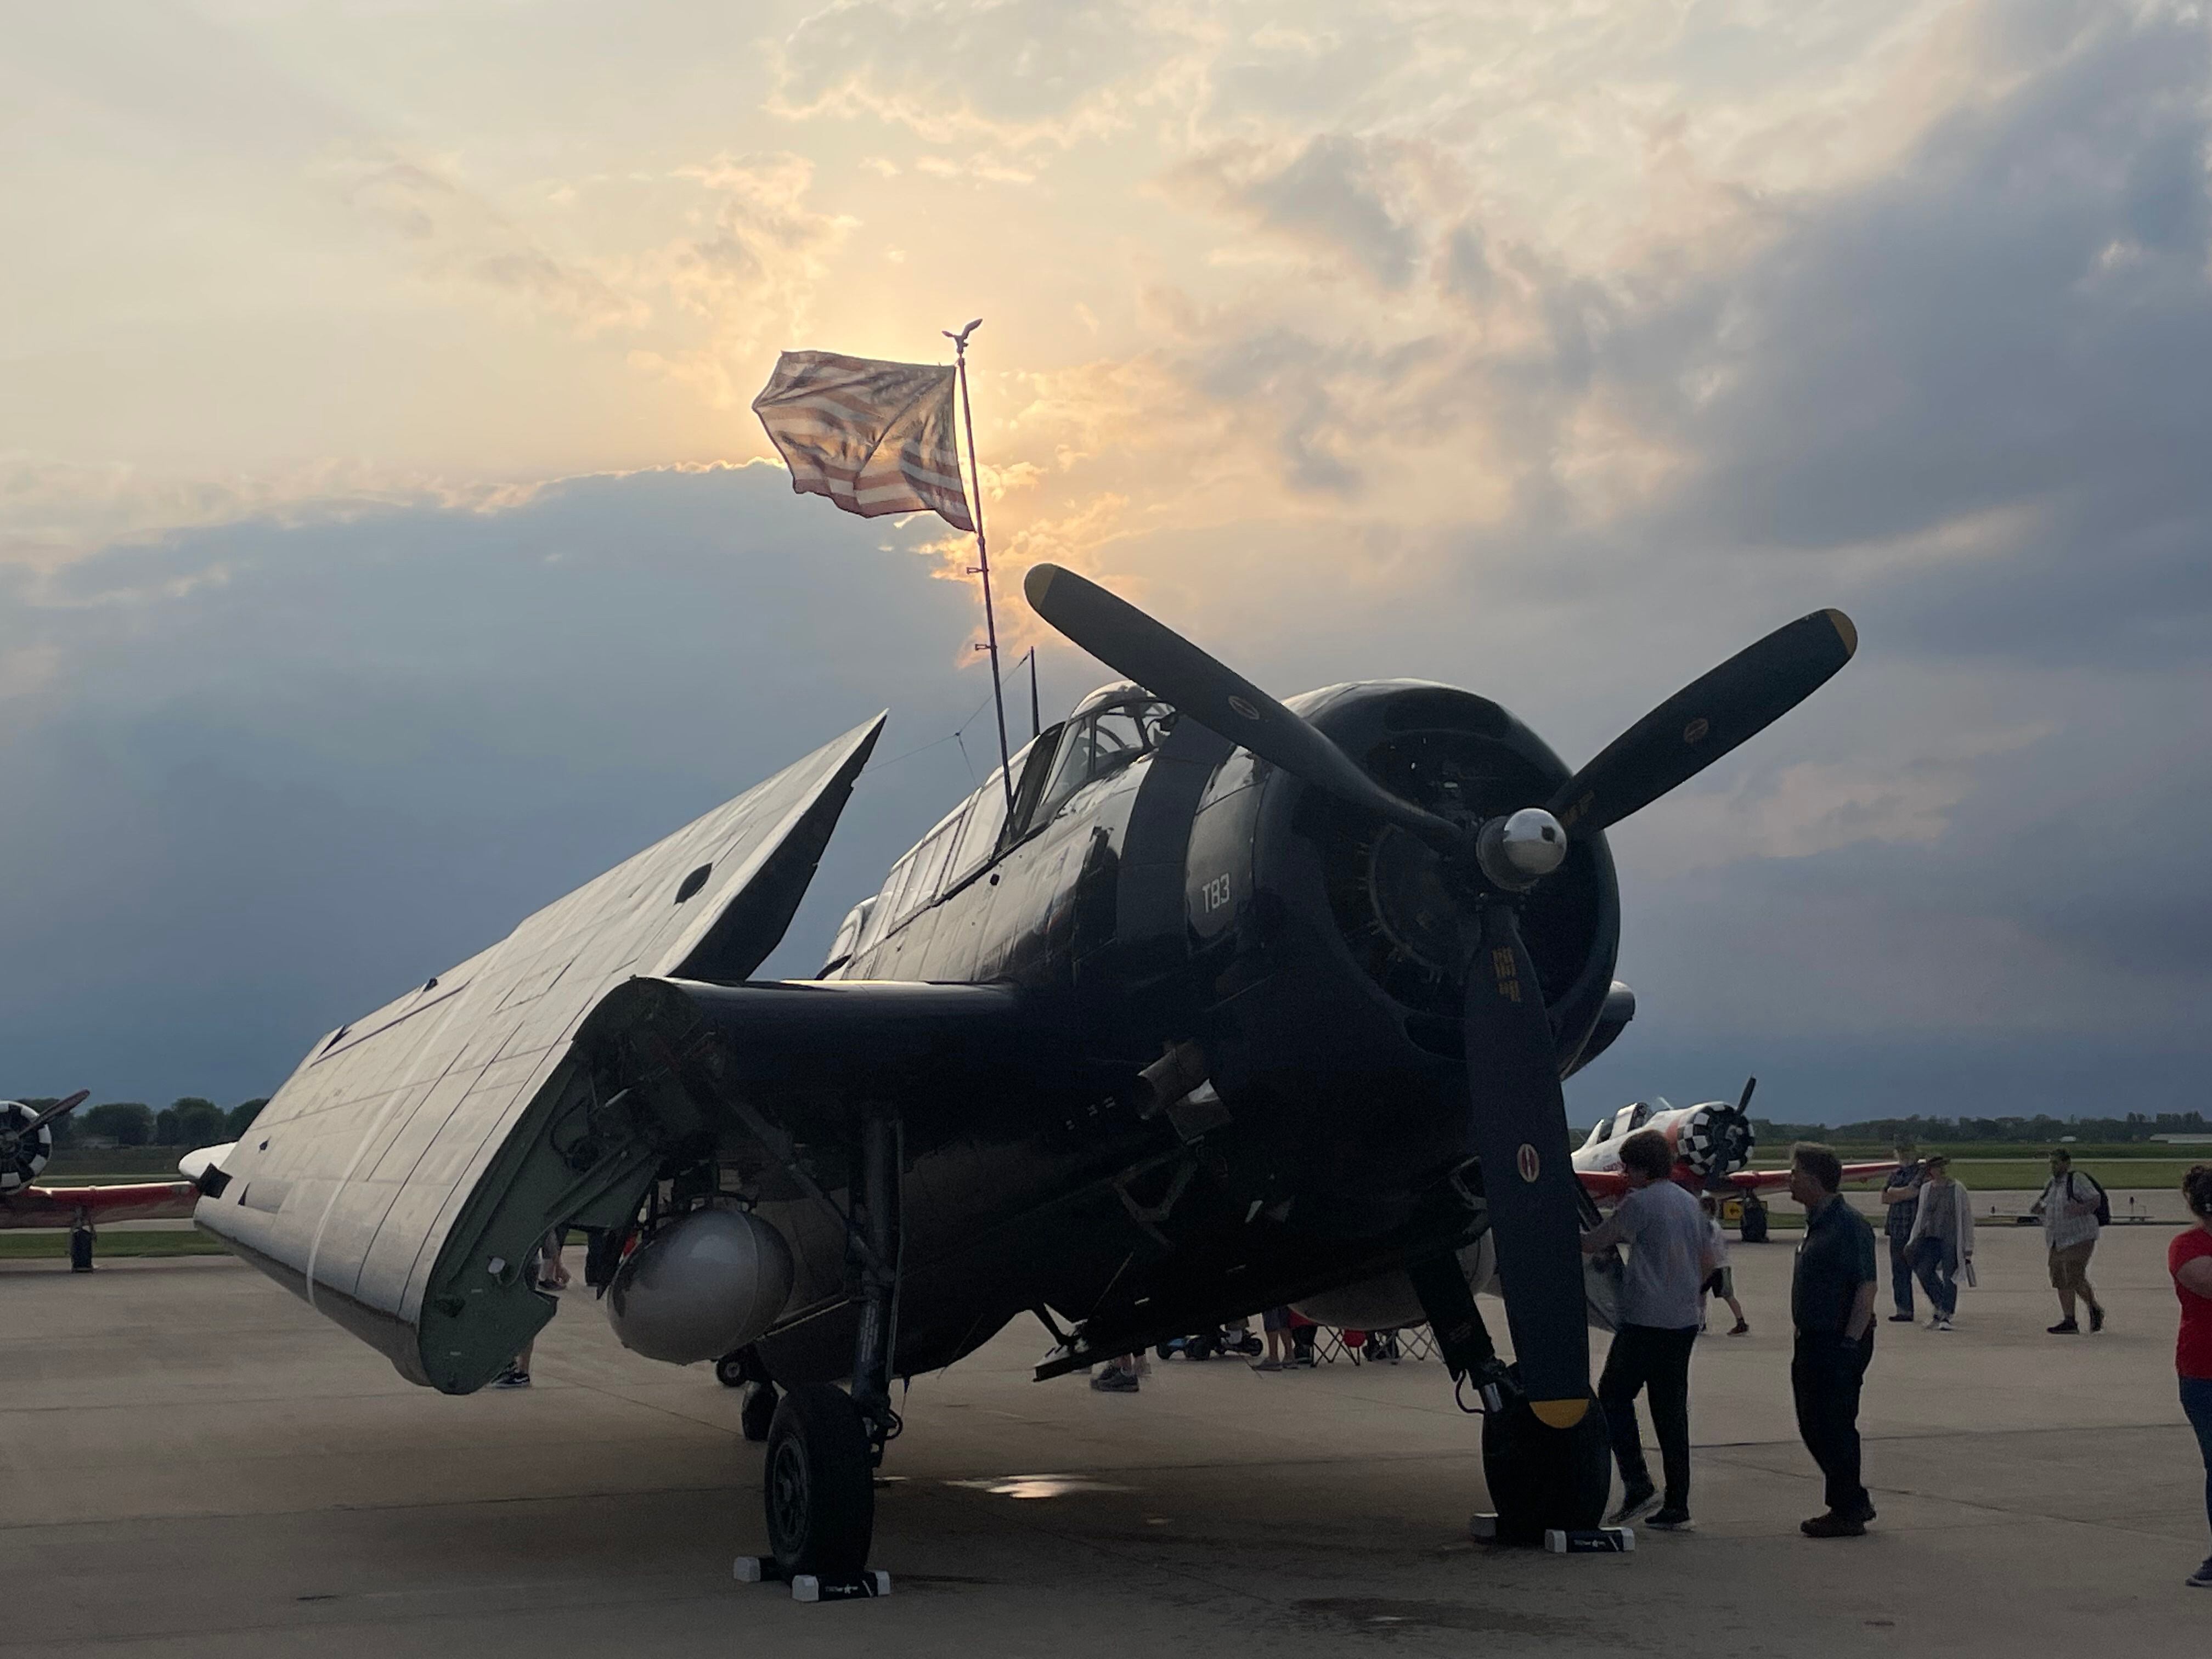 The sun begins to set behined the TBM Avenger aircrafts during the annual TBM Reunion and Airshow on Friday, May 20, 2022 at the Illinois Valley Regional Airport in Peru. 